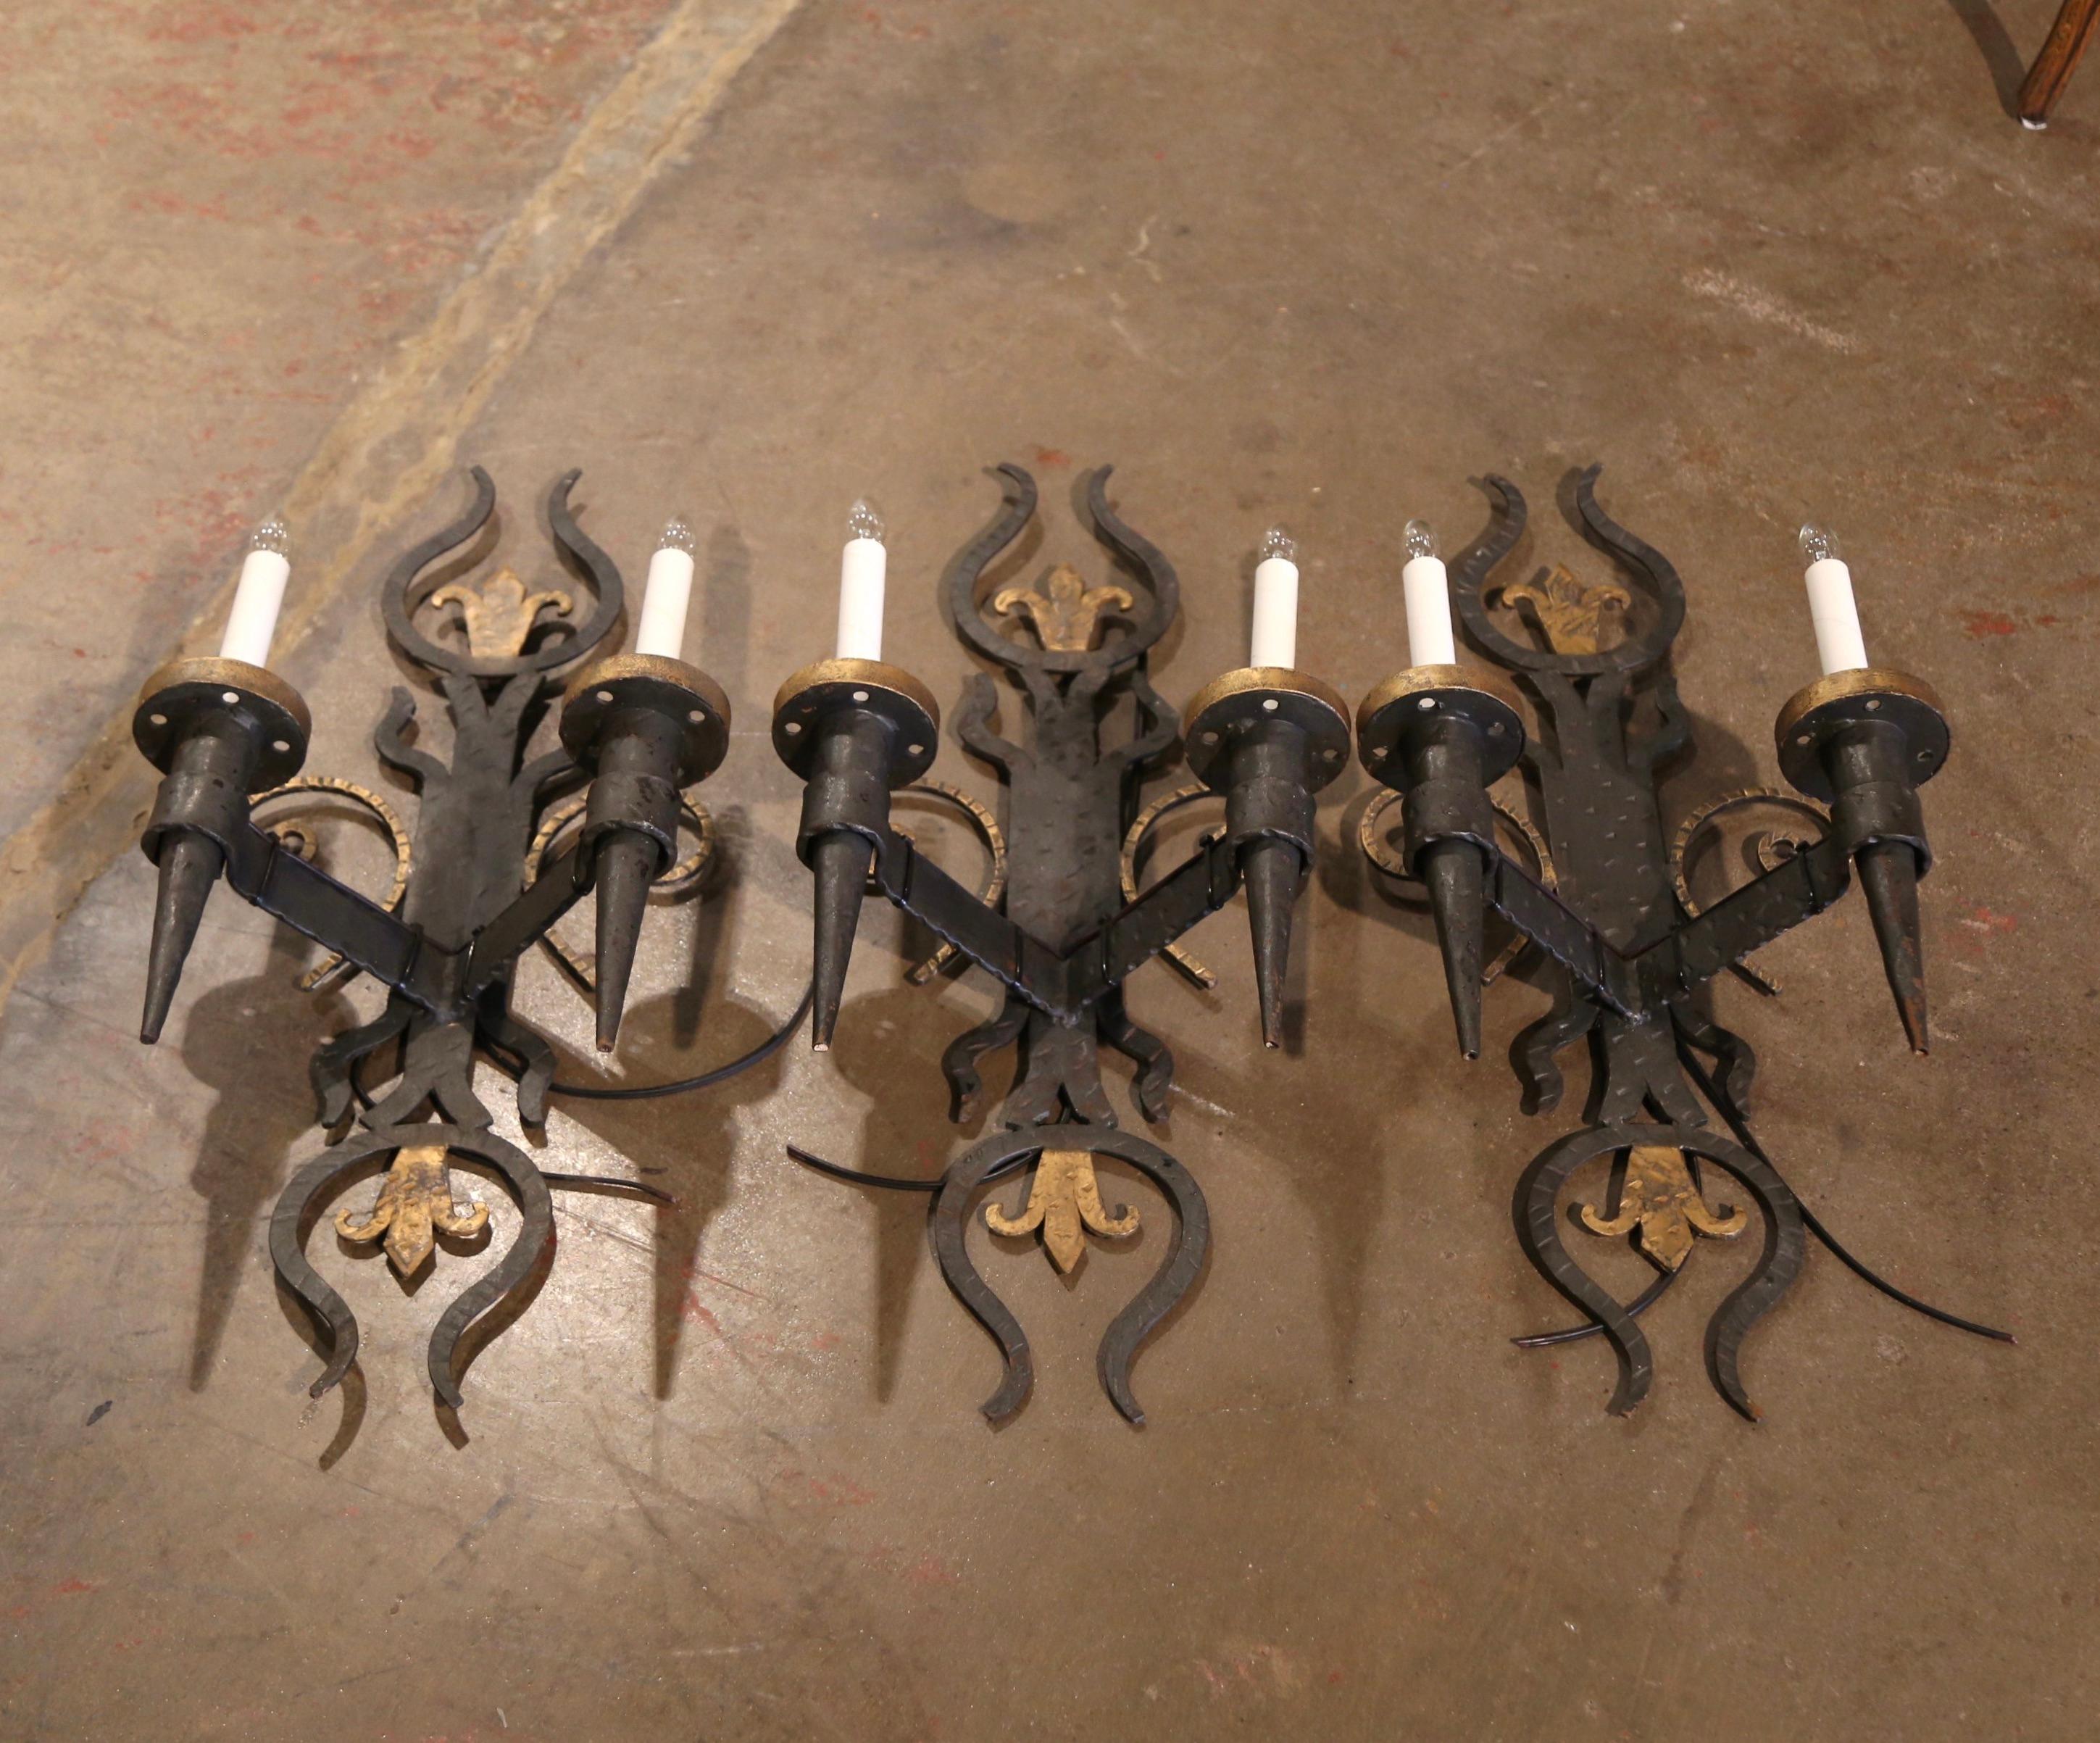 Decorate a hallway or entryway with this set of antique wall torcheres. Crafted in France, circa 1890, the fixtures are built of forged and hammered iron with scroll decor and further embellished with a Fleur-de-Lis motif at the top and bottom. Each